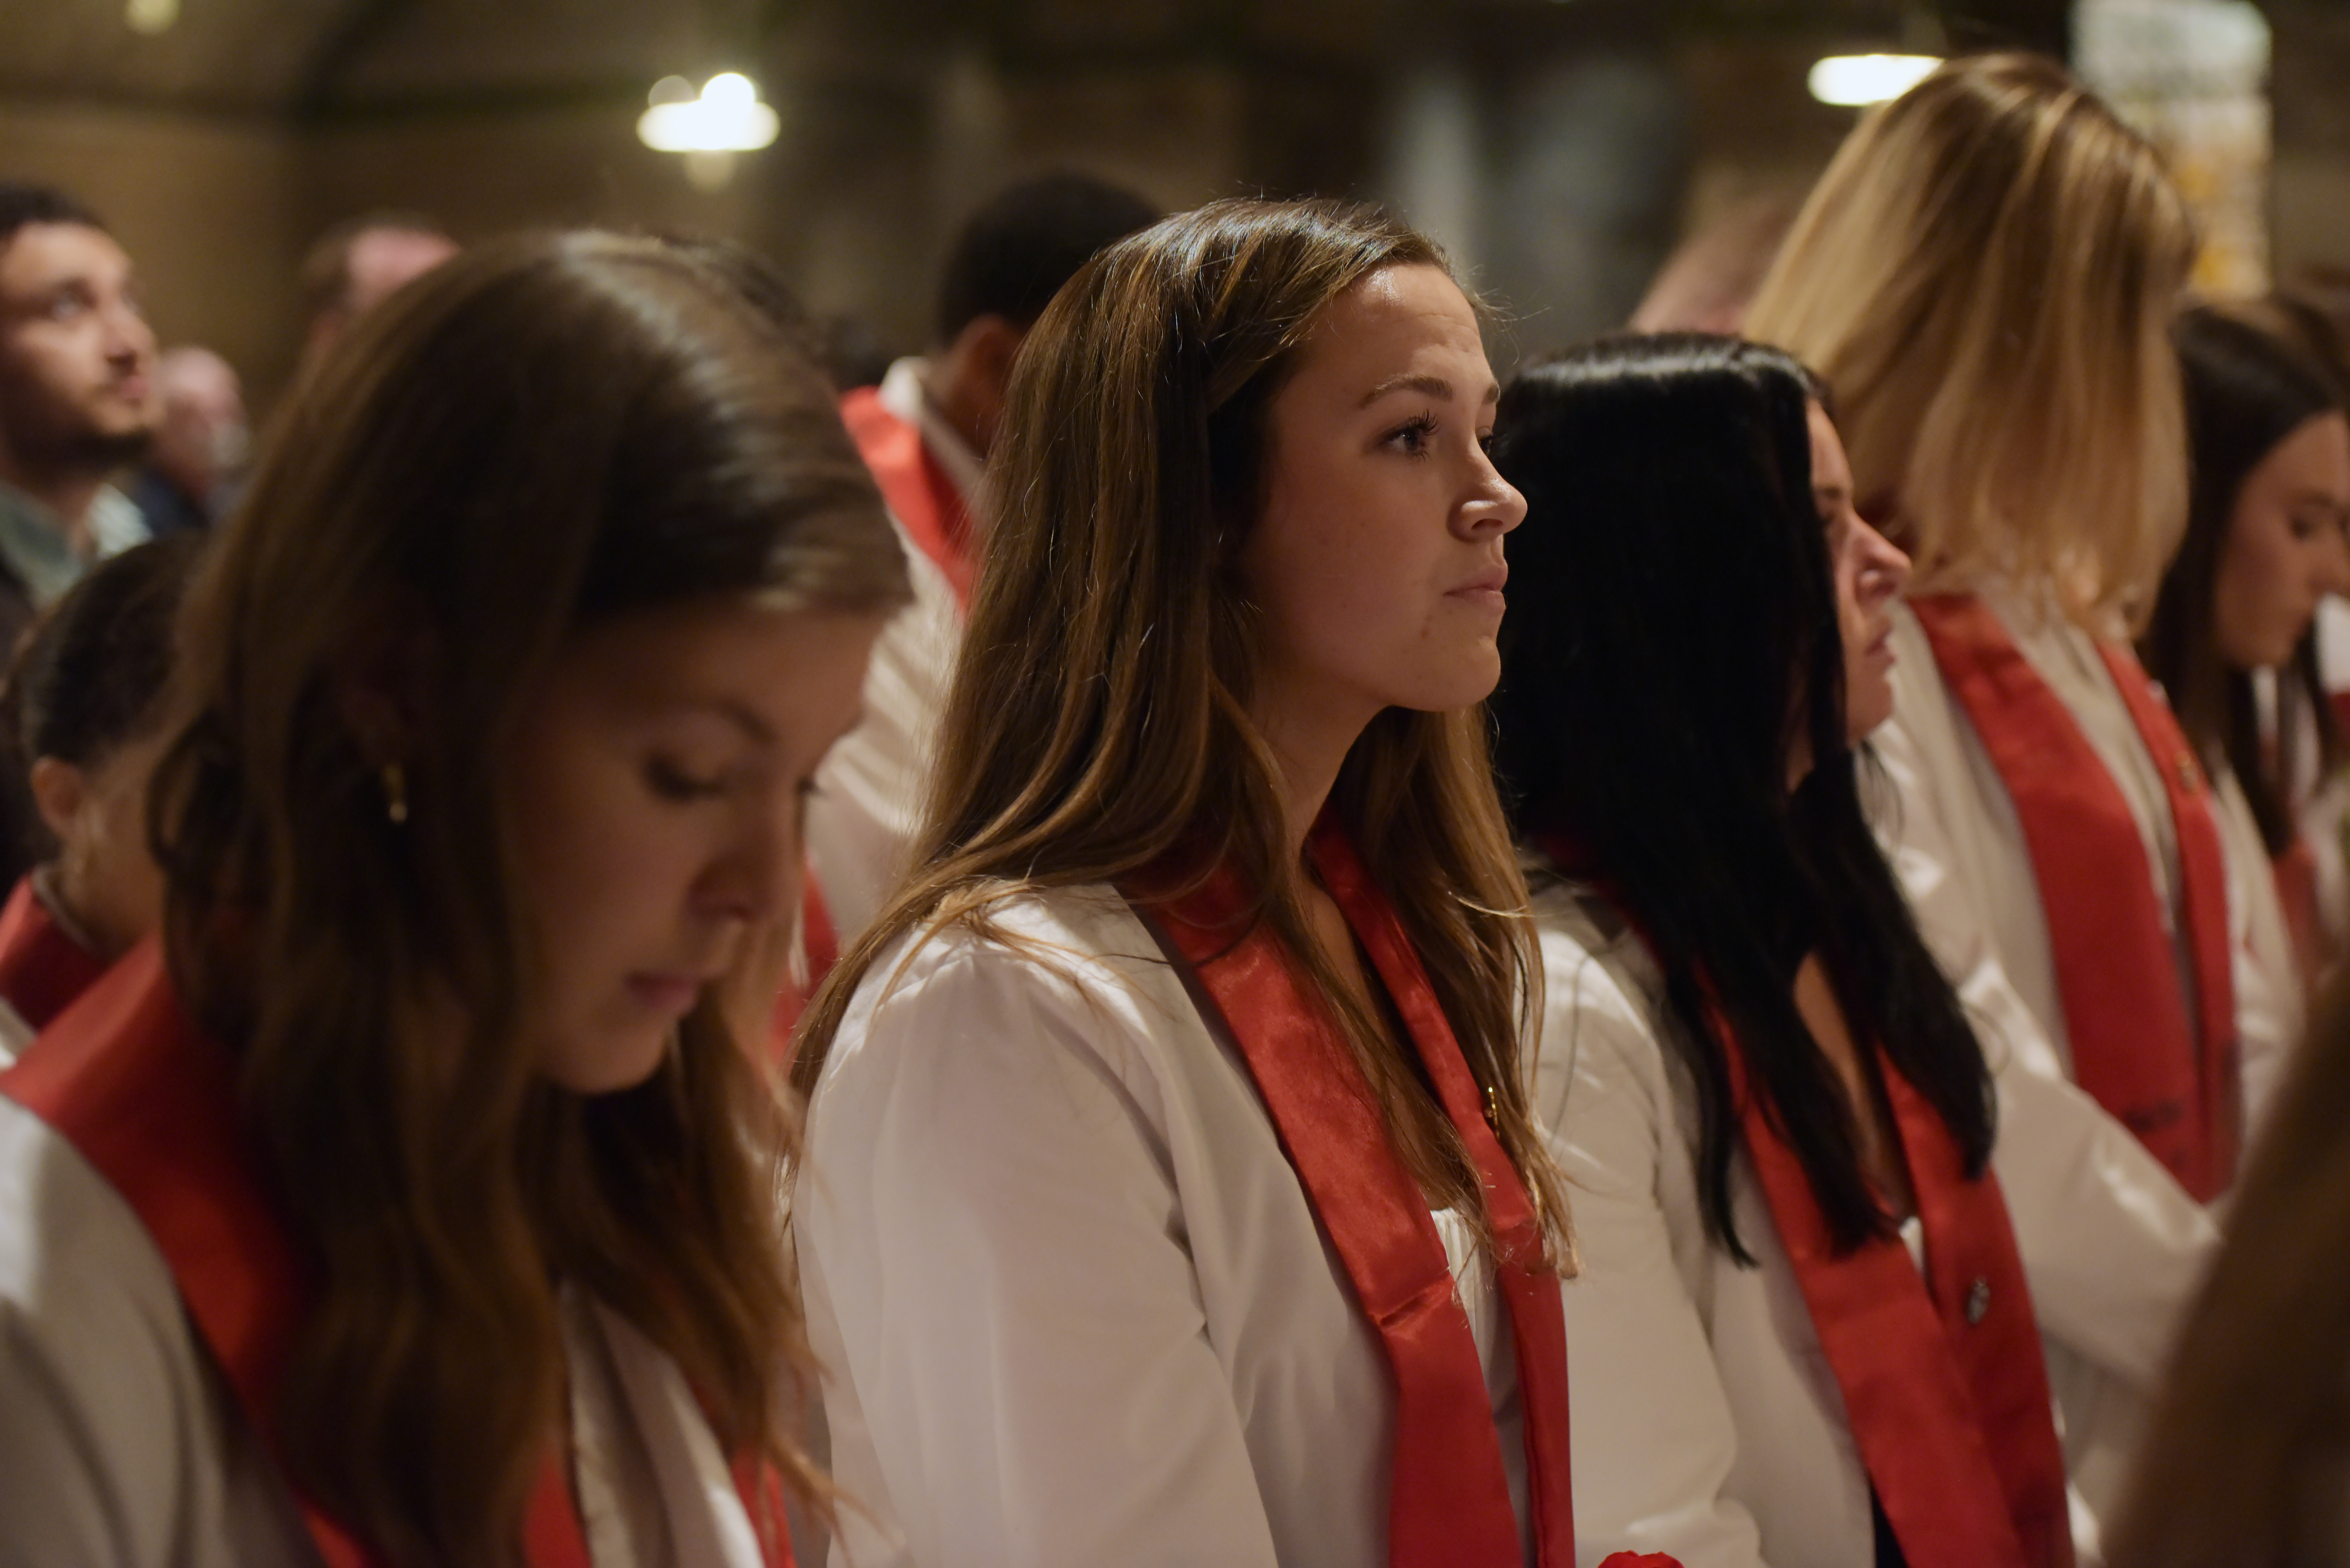 Eighty one nursing graduates received pins recognizing their transition from students to professionals at the traditional nursing pinning ceremony in the Crypt Chapel May 11. 